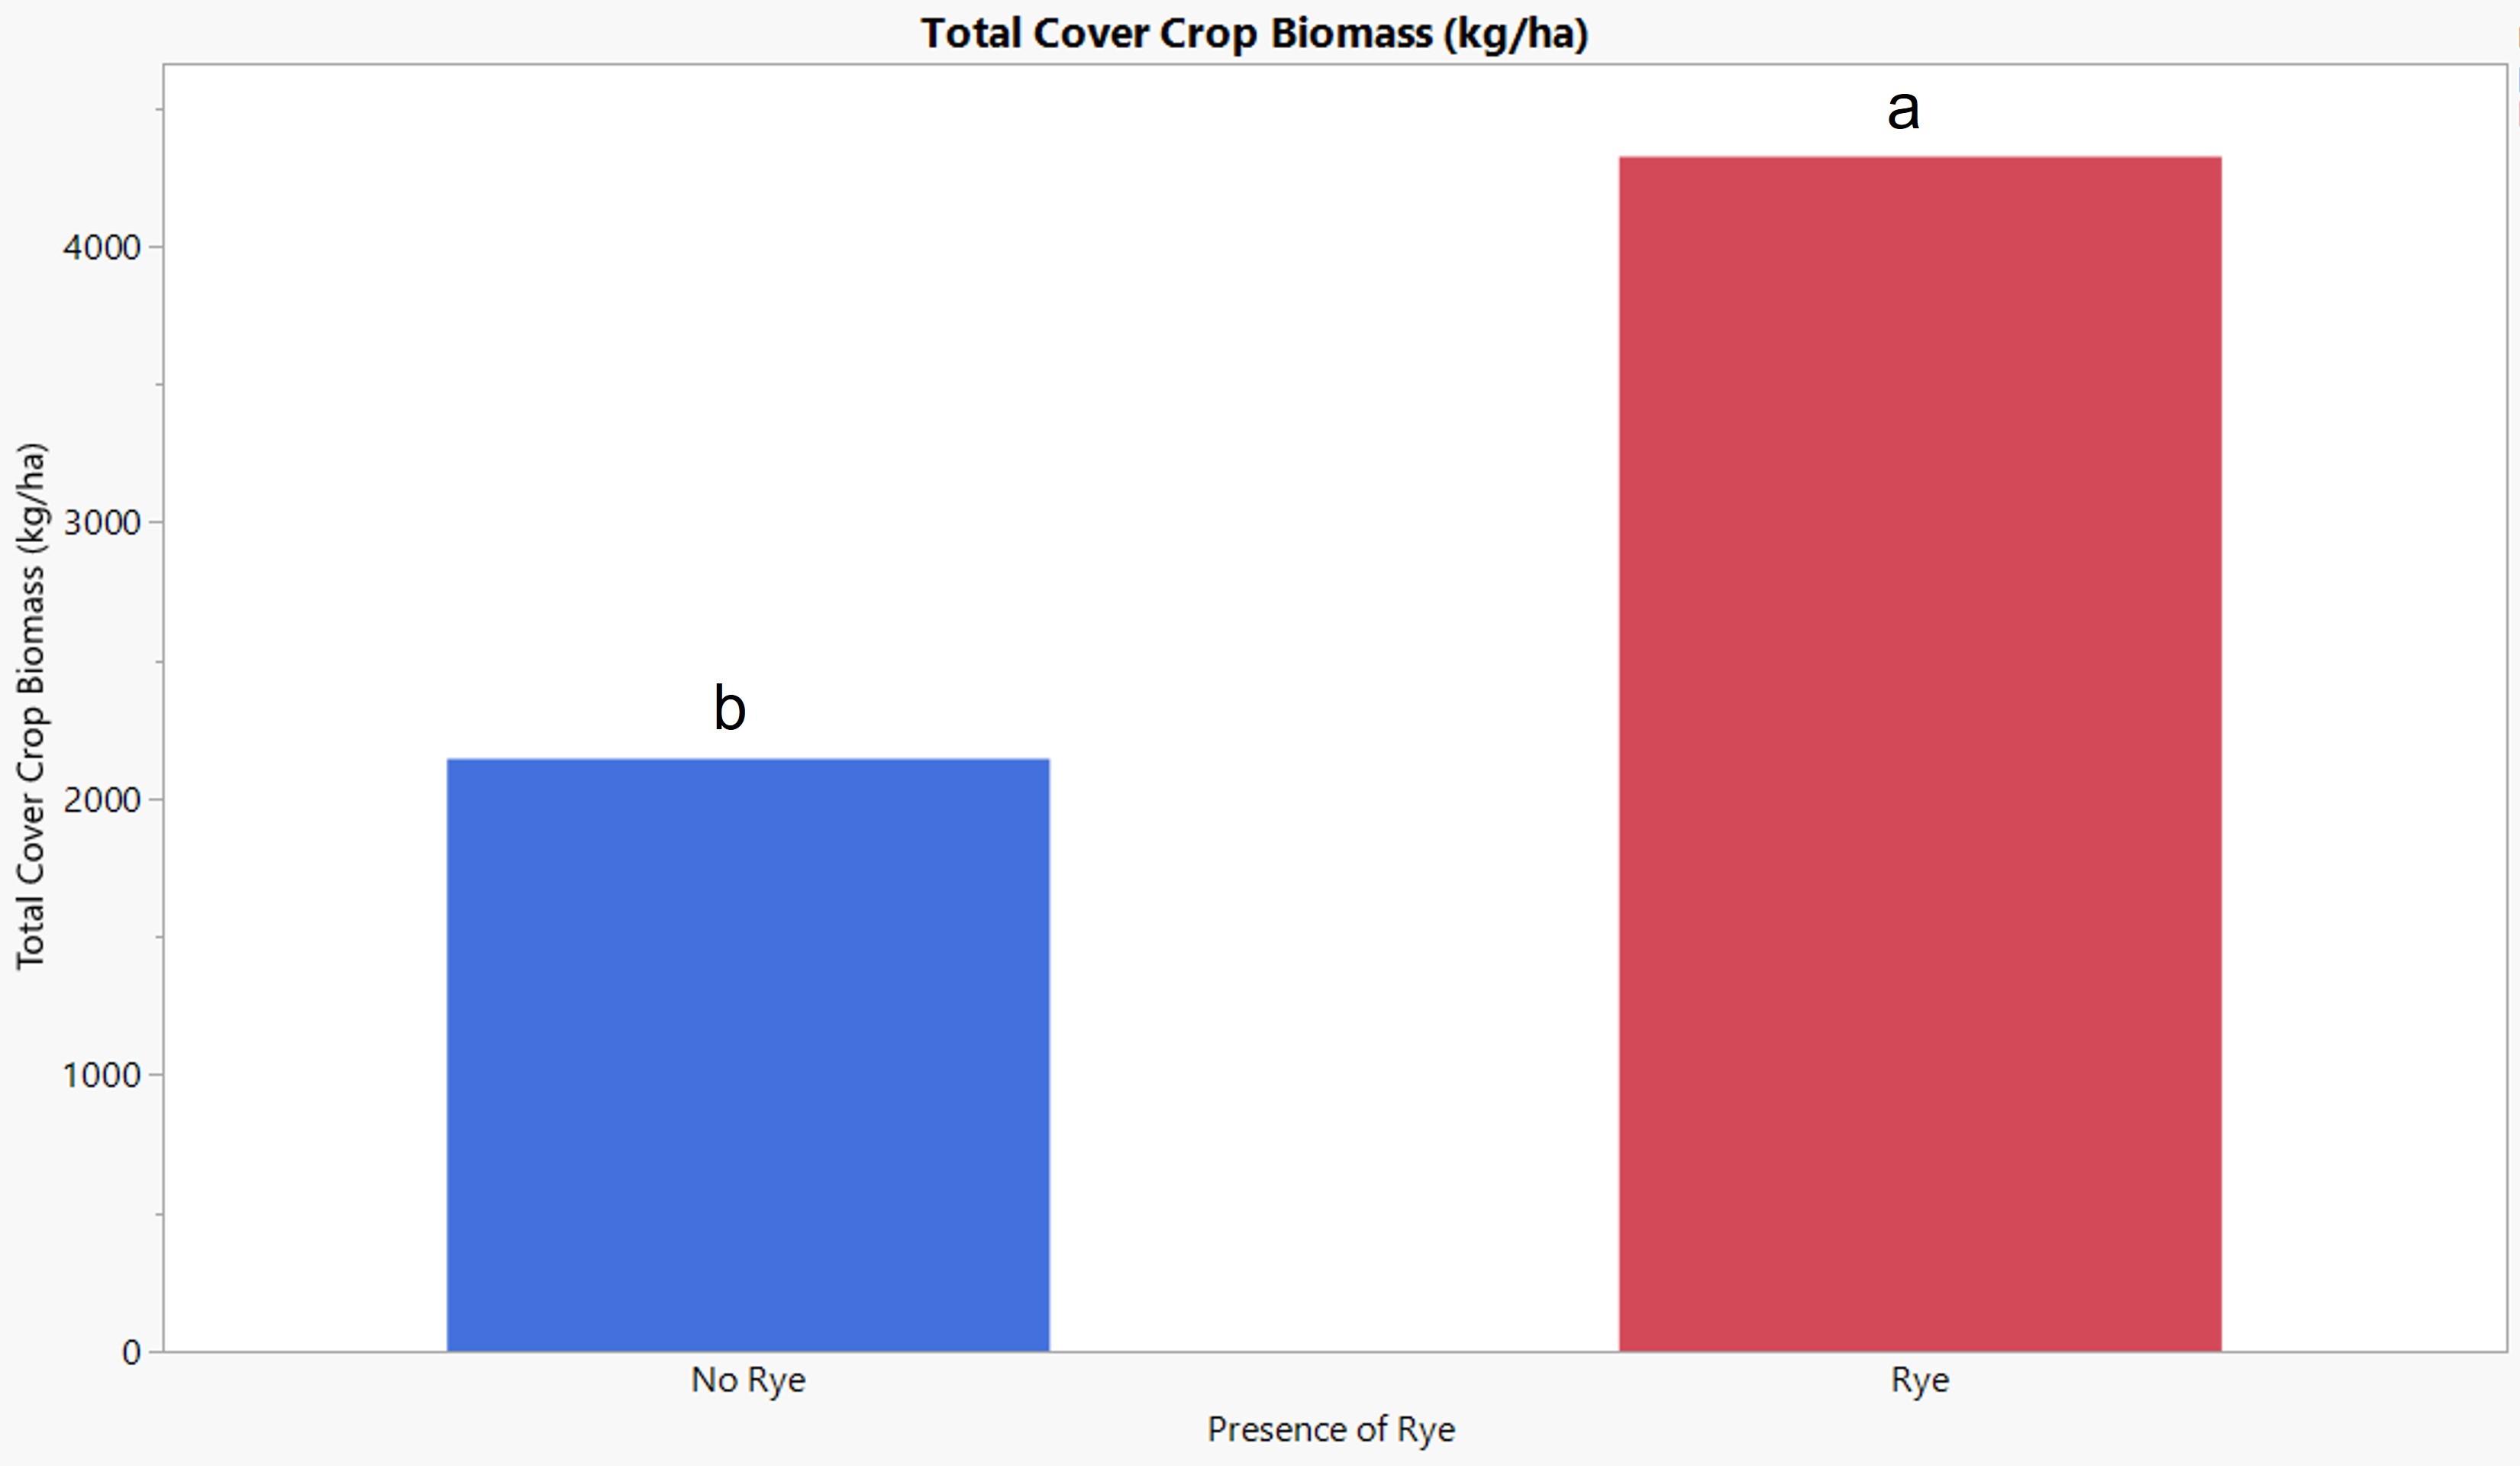 Bar graph showing the difference in amount of legume cover crop biomass with and without the addition of cereal rye. The addition of cereal rye had more cover crop biomass compared to without cereal rye.